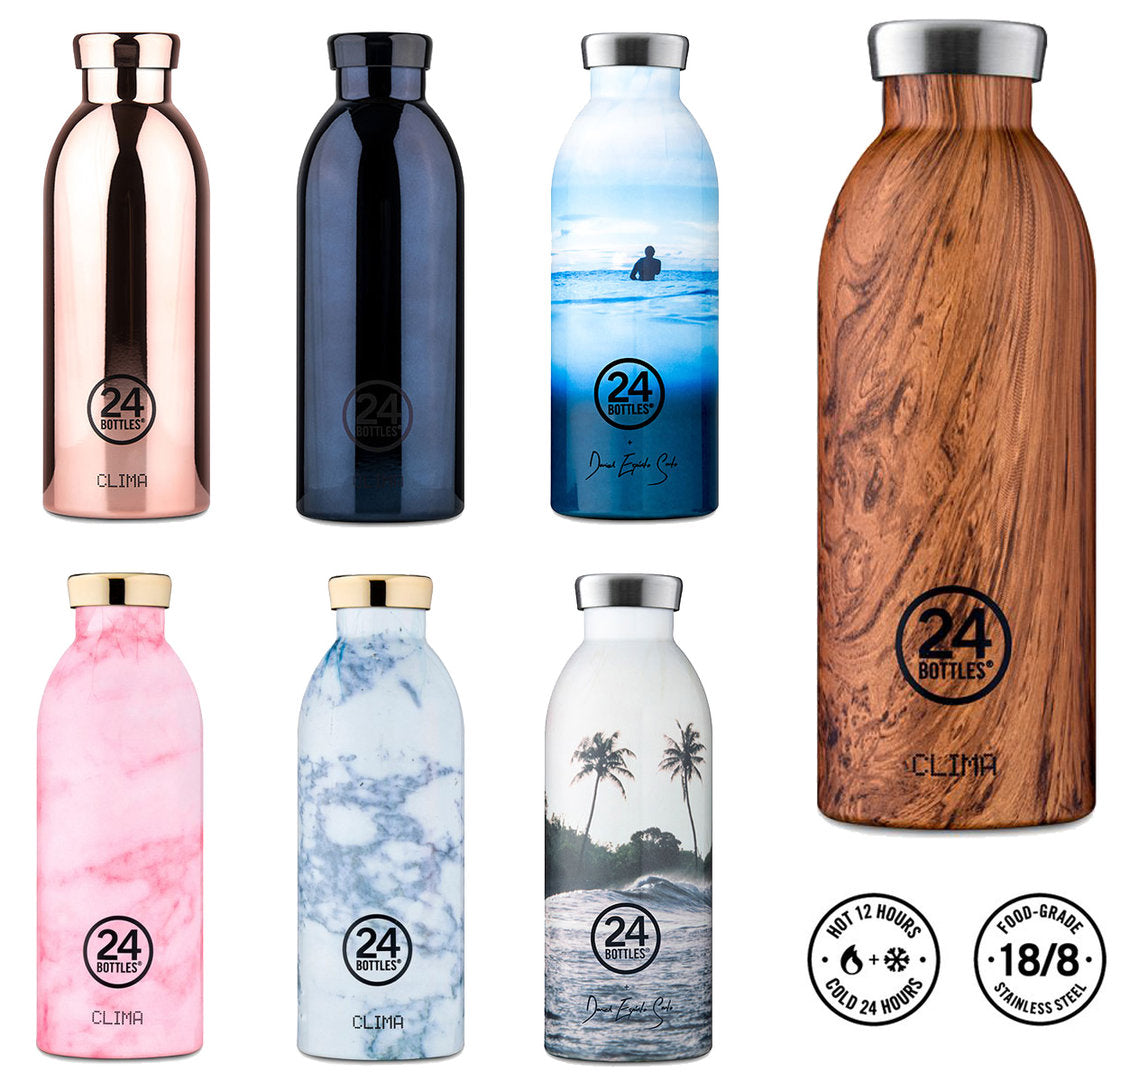 Thermos bottle CLIMA special edition - 24 bottles